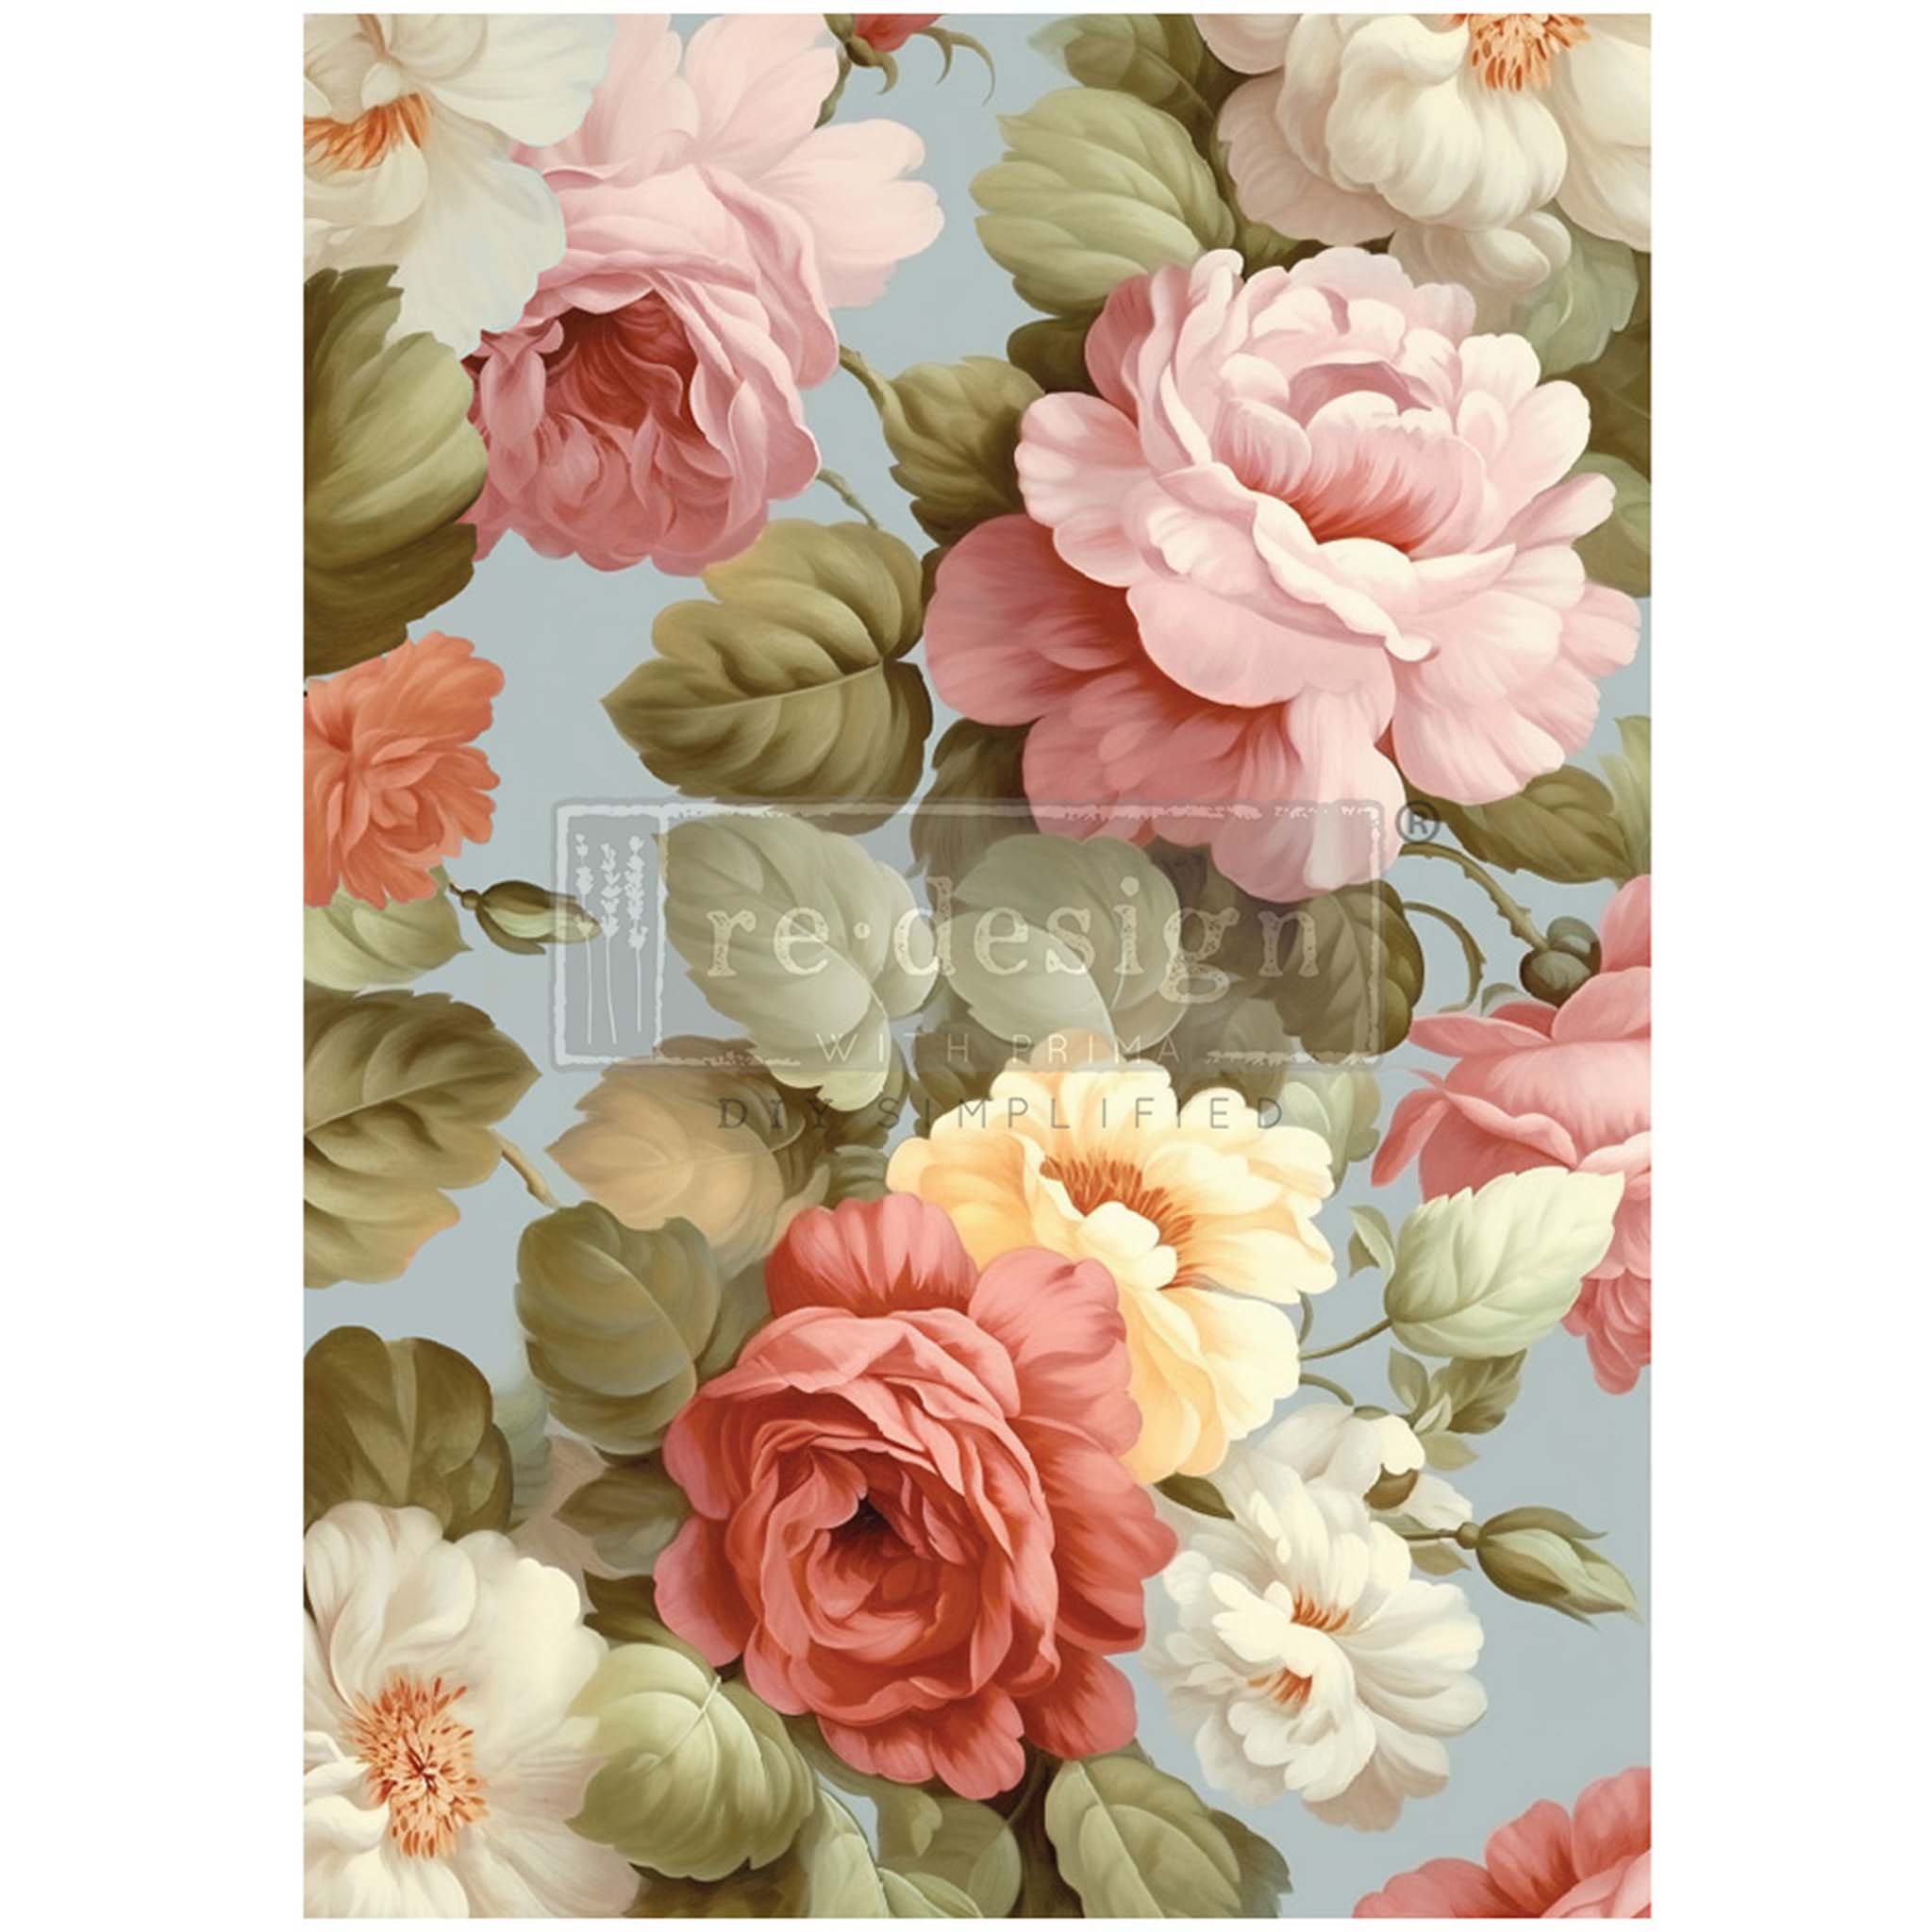 A1 fiber paper design featuring large mauve and cream colored roses on a soft blue background. White borders are on the sides.